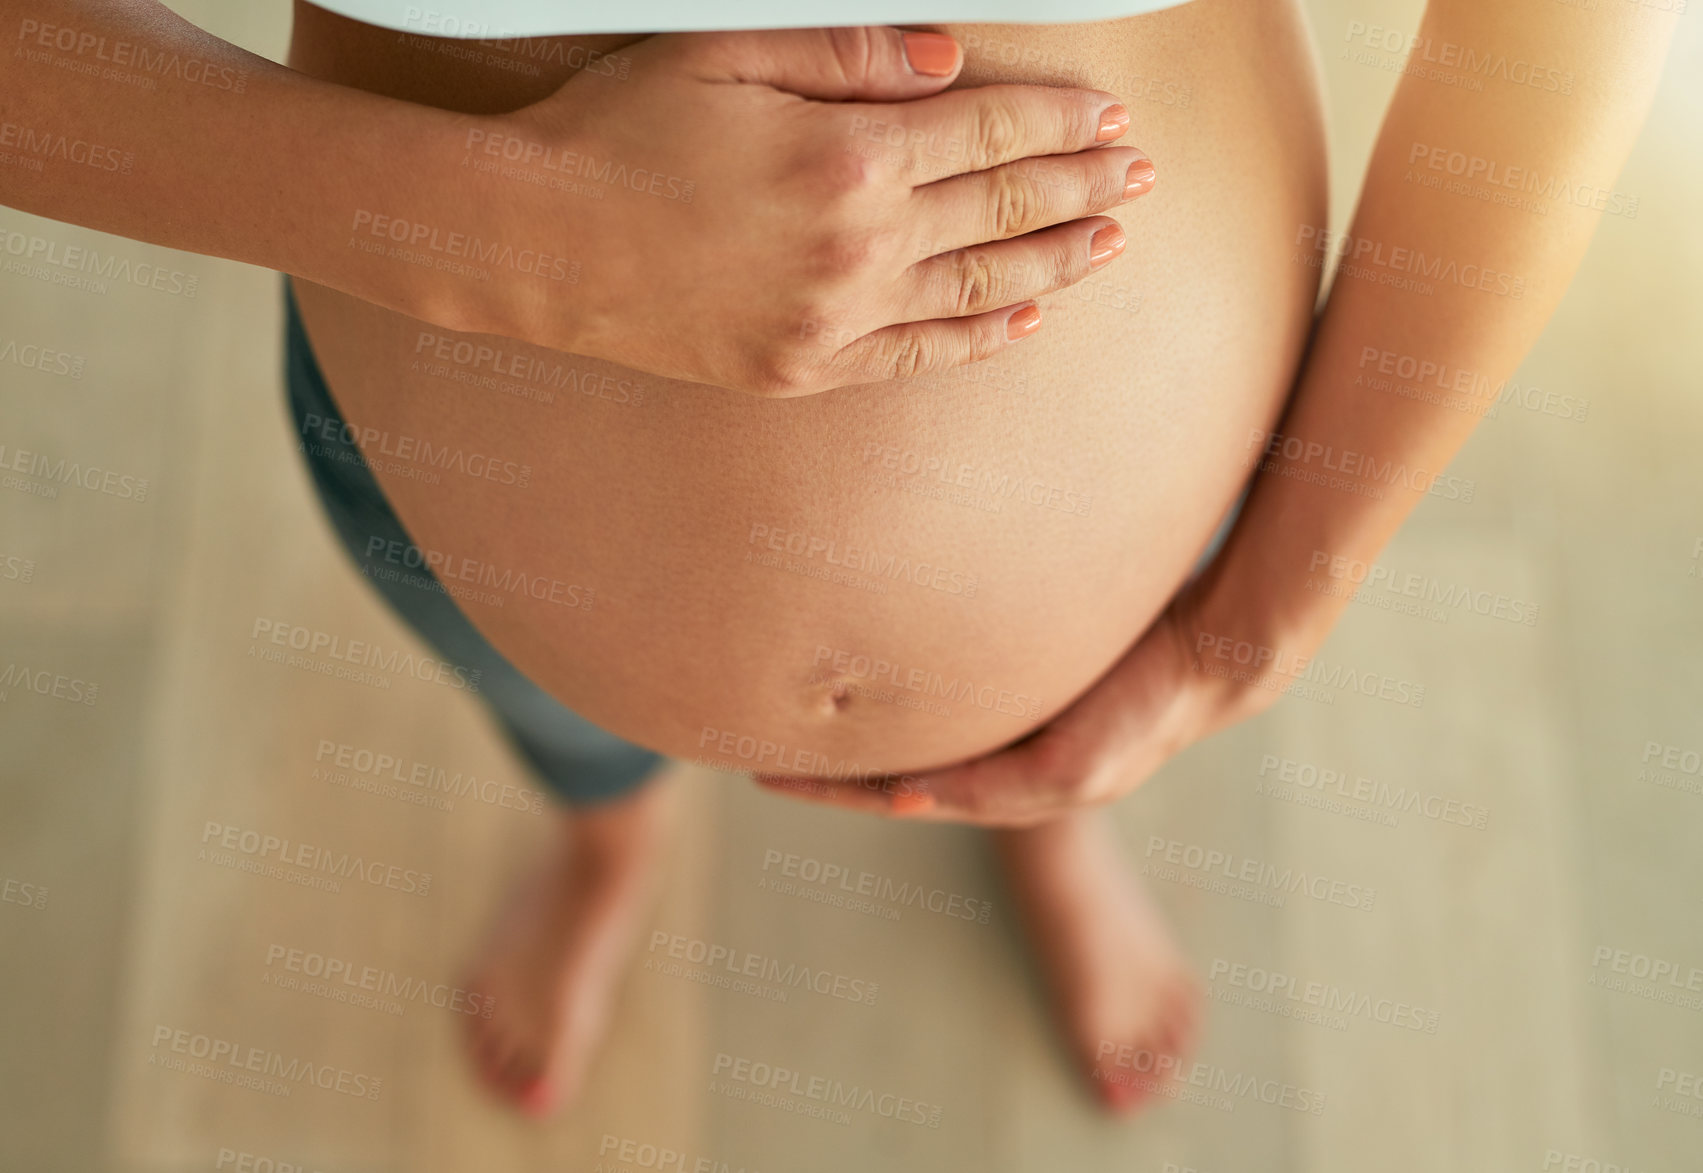 Buy stock photo Cropped high angle shot of a pregnant woman holding her bare belly